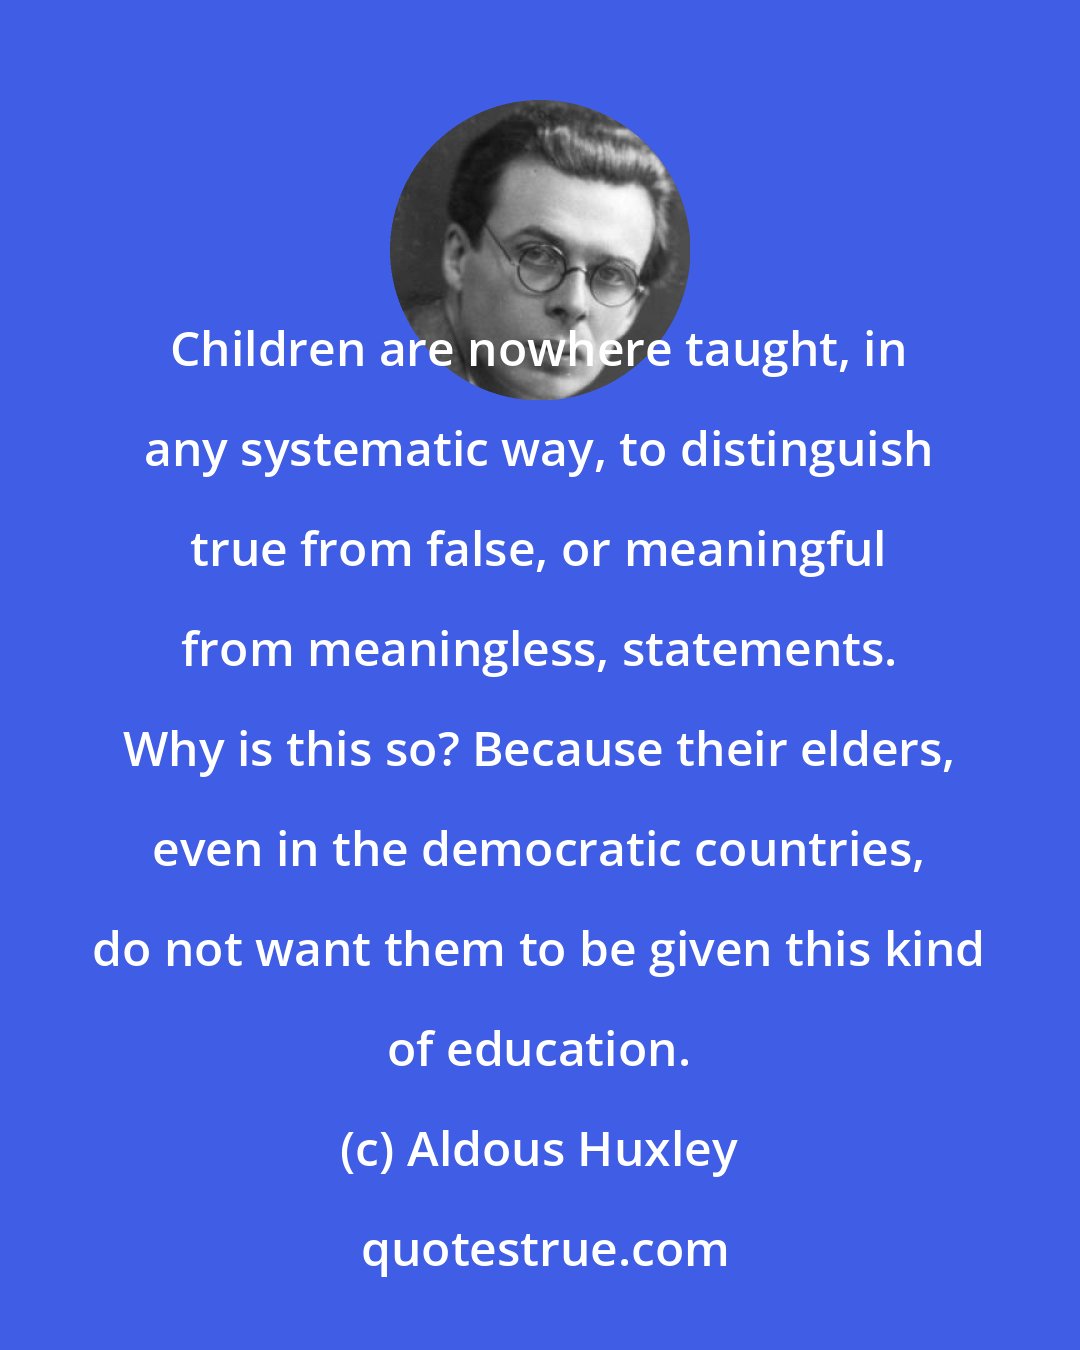 Aldous Huxley: Children are nowhere taught, in any systematic way, to distinguish true from false, or meaningful from meaningless, statements. Why is this so? Because their elders, even in the democratic countries, do not want them to be given this kind of education.